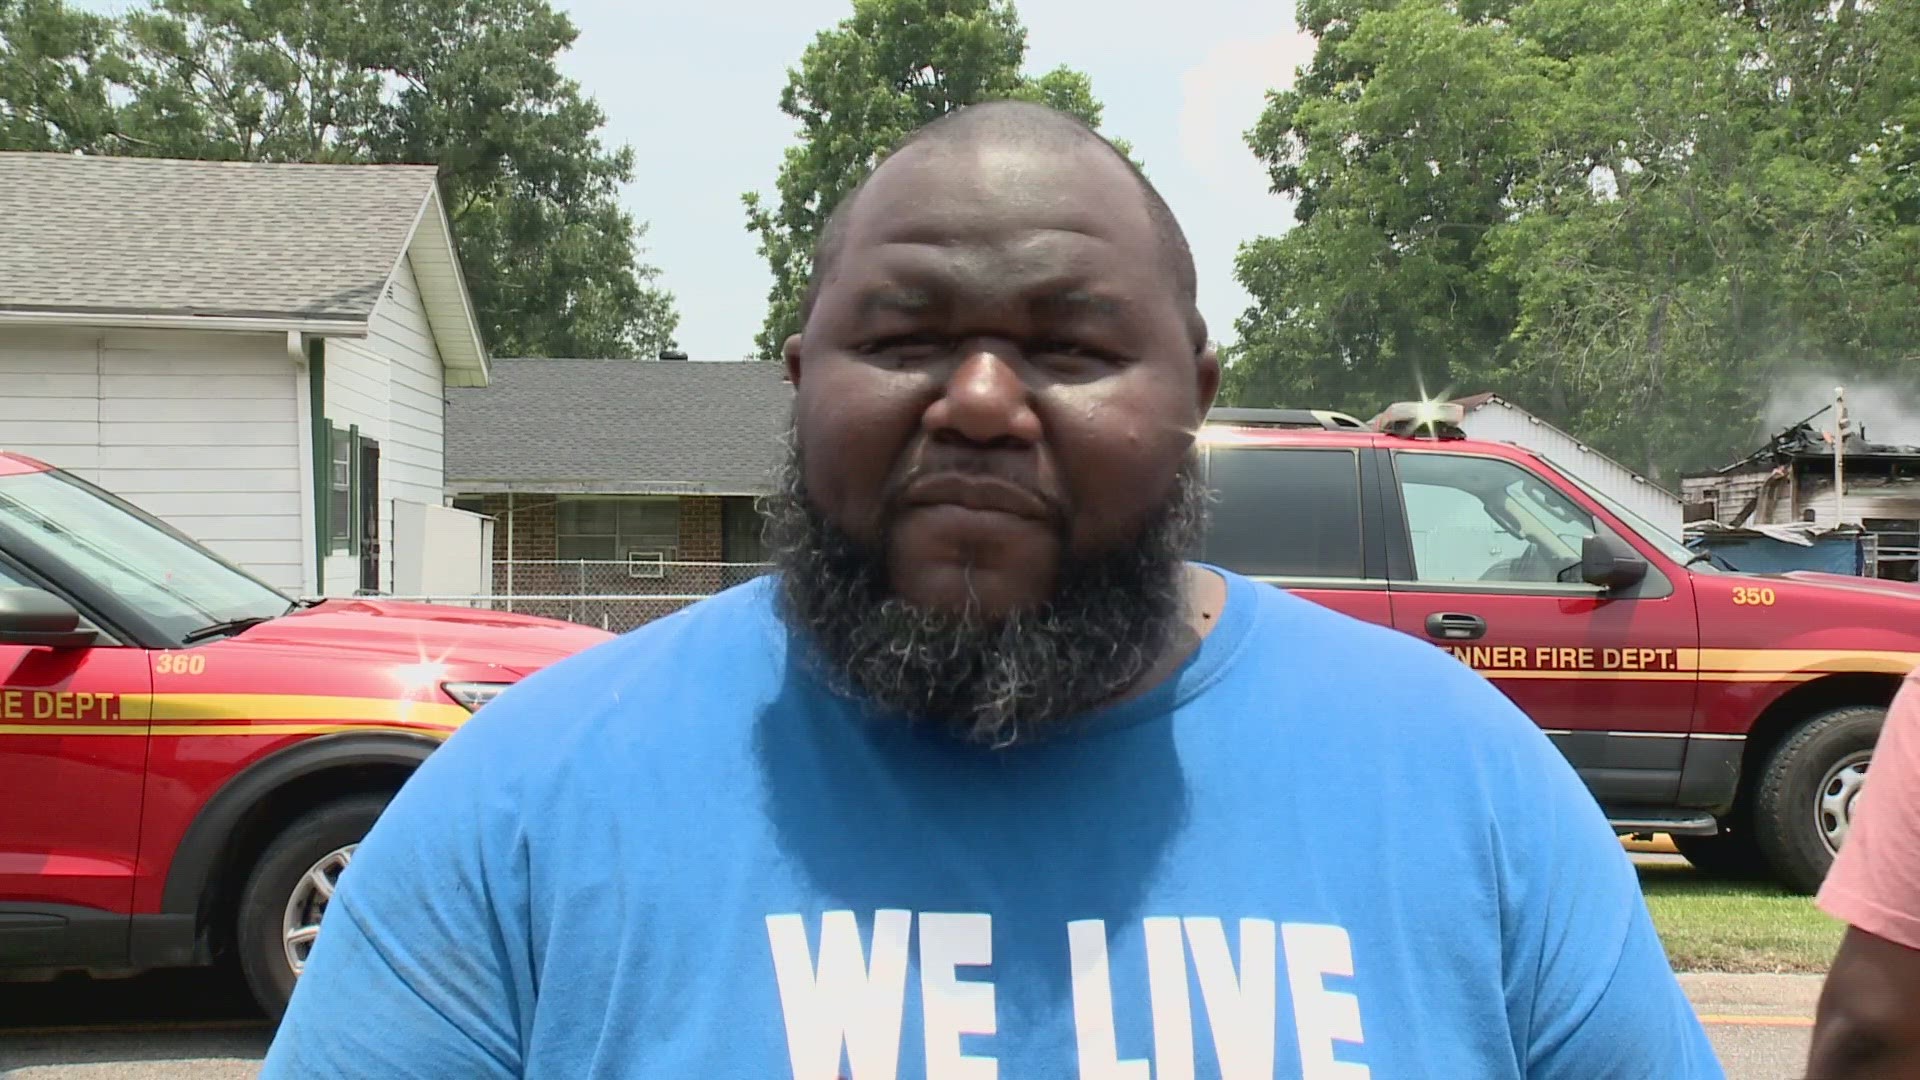 A man says he saw a house on fire so he stopped and rescued those inside.